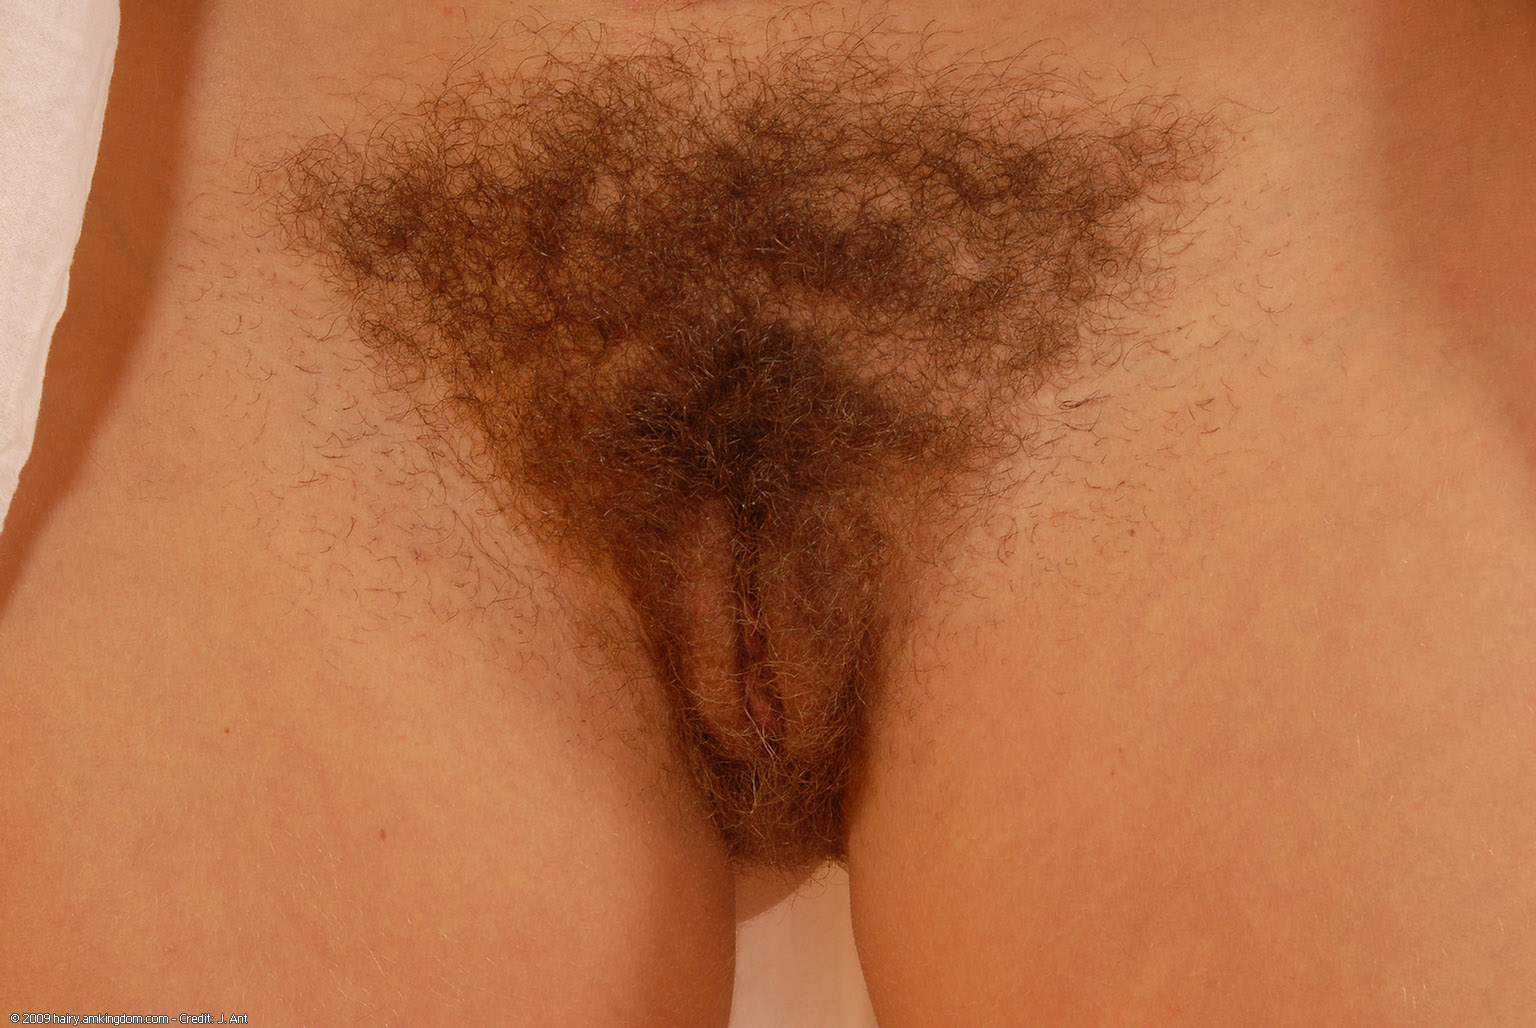 Celine Atk Natural Hairy « ATK Natural And Hairy « Free ATK Pictures @ Bravo ATK